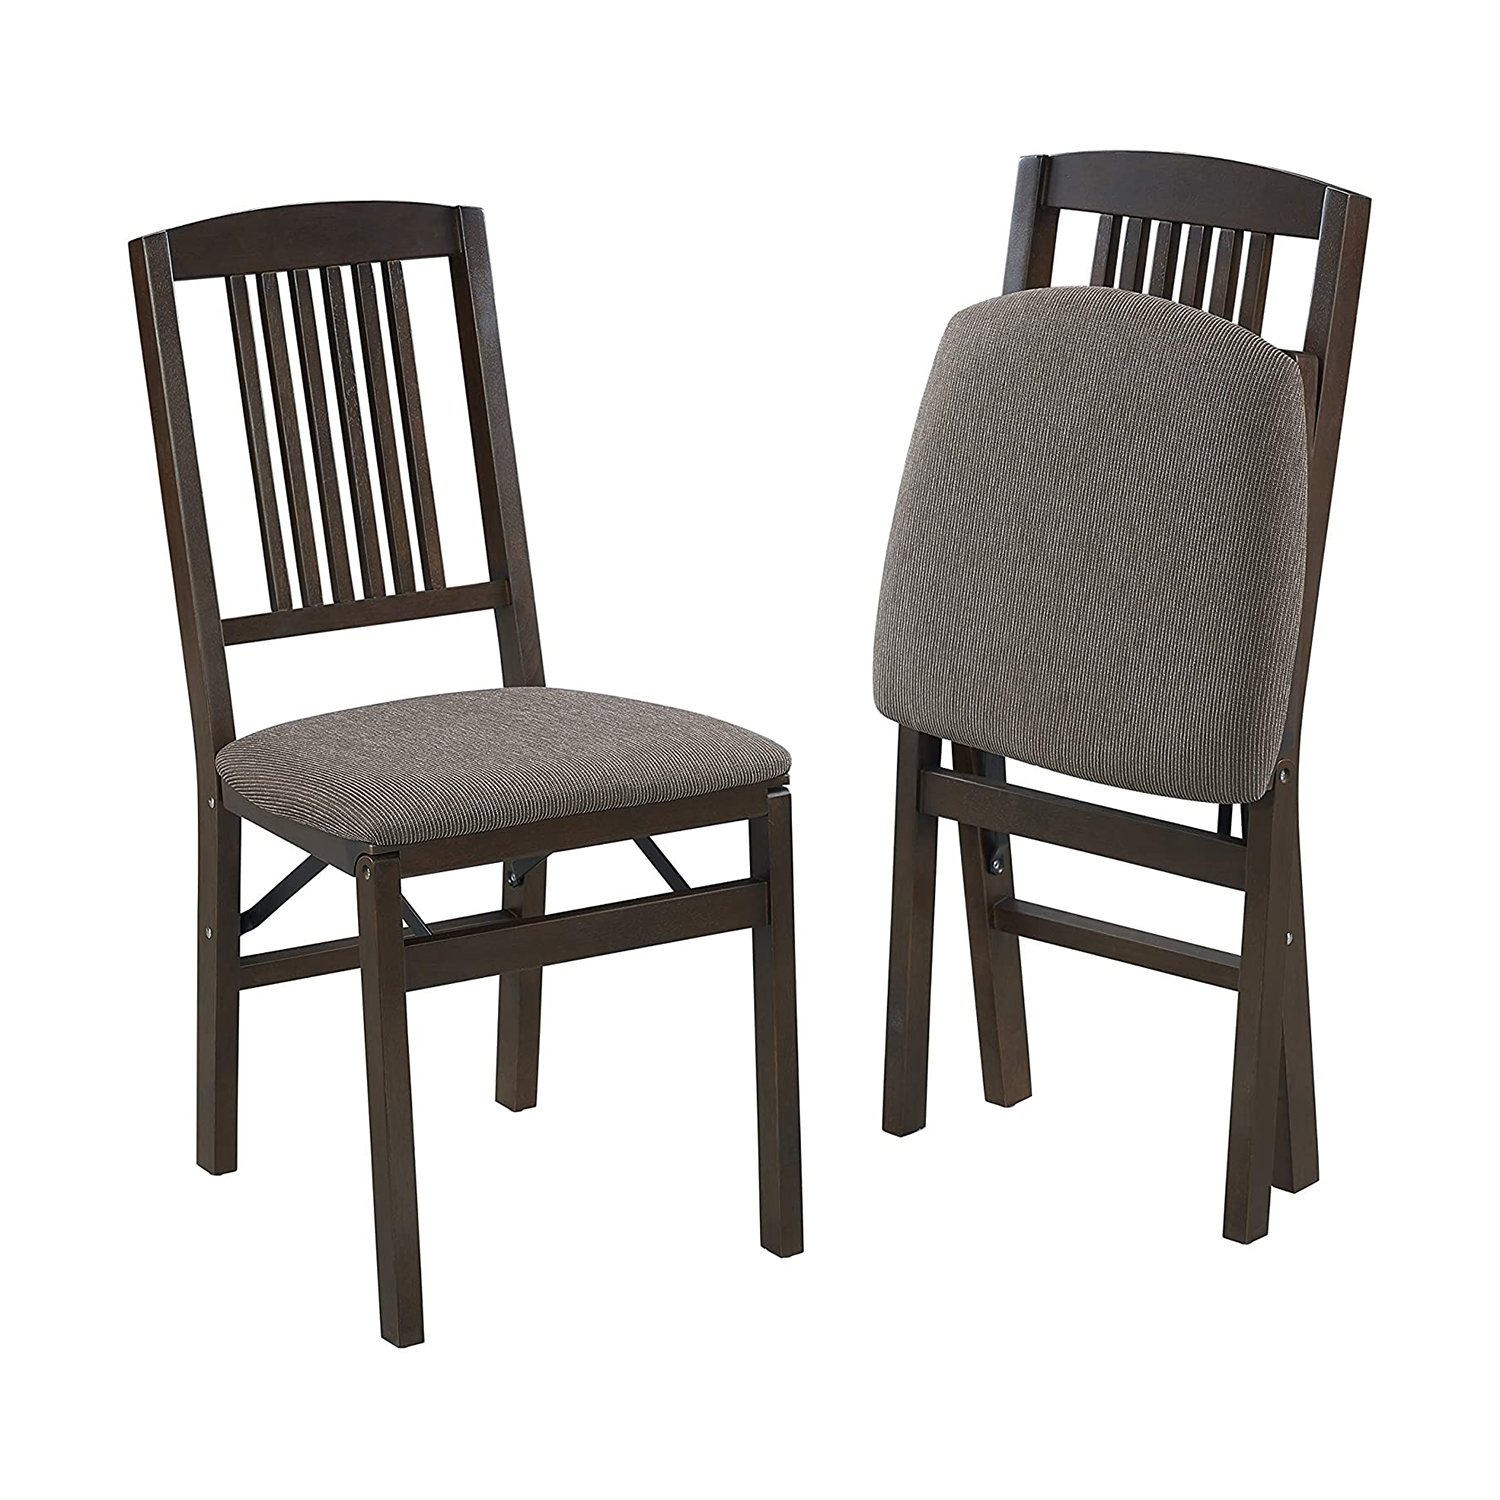 MECO Stakmore Wood Fabric Upholstered Seat Folding Chair Set, Espresso (2 Pack) - image 3 of 6